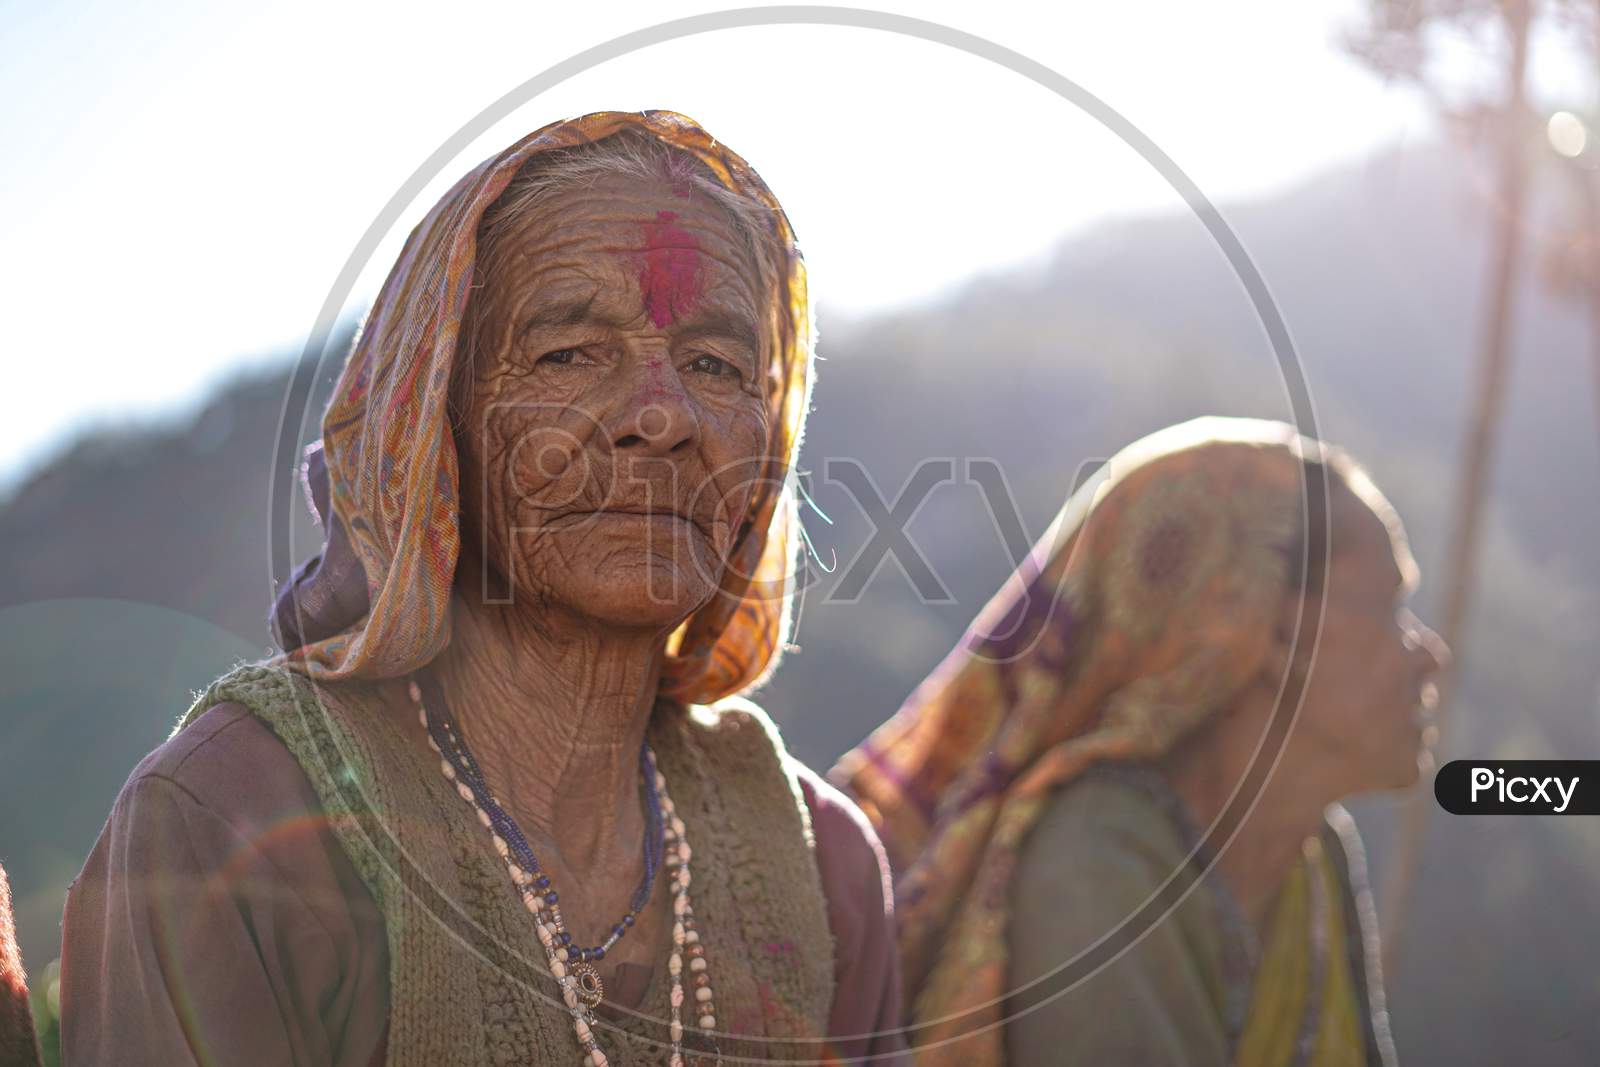 Almora, Uttrakhand / India- June 4 2020 : A Mid Portrait Or An Old Village Woman With Lots Of Wrinkles On Her Face Wearing Pink Blouse With A Sweater, Sitting In A Forest.